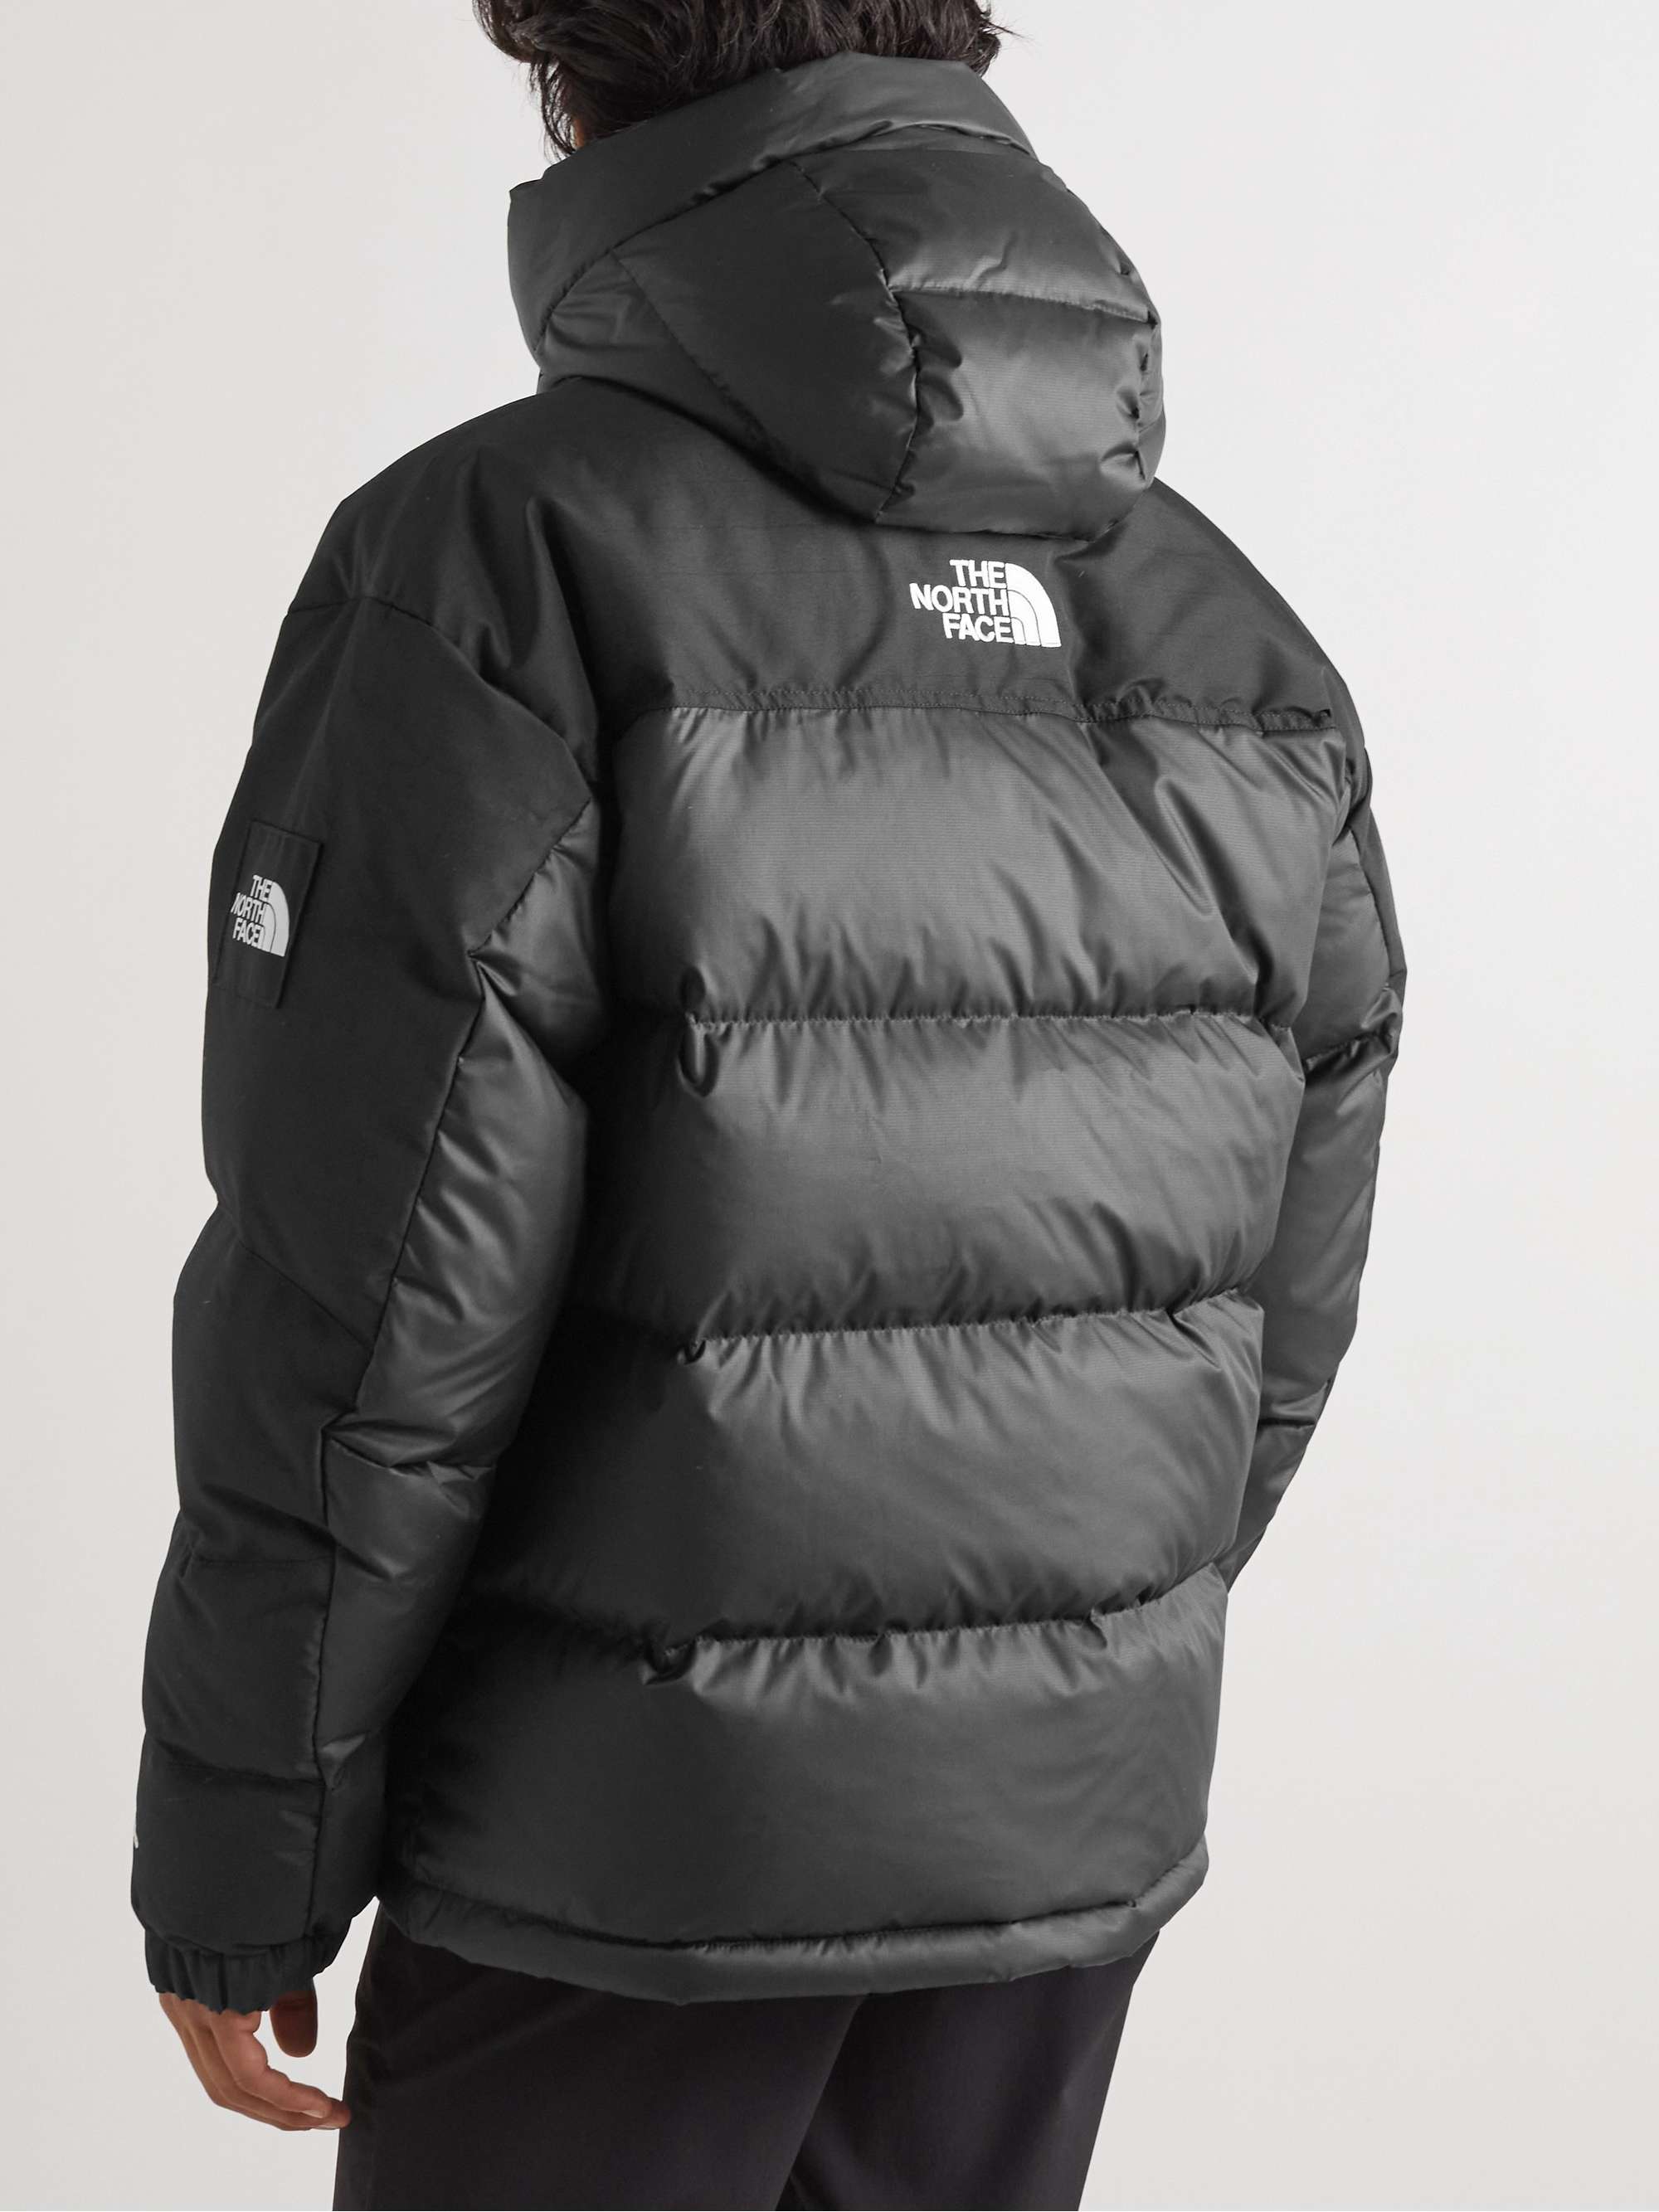 THE NORTH FACE BB HMLYN Quilted Ripstop Hooded Down Parka